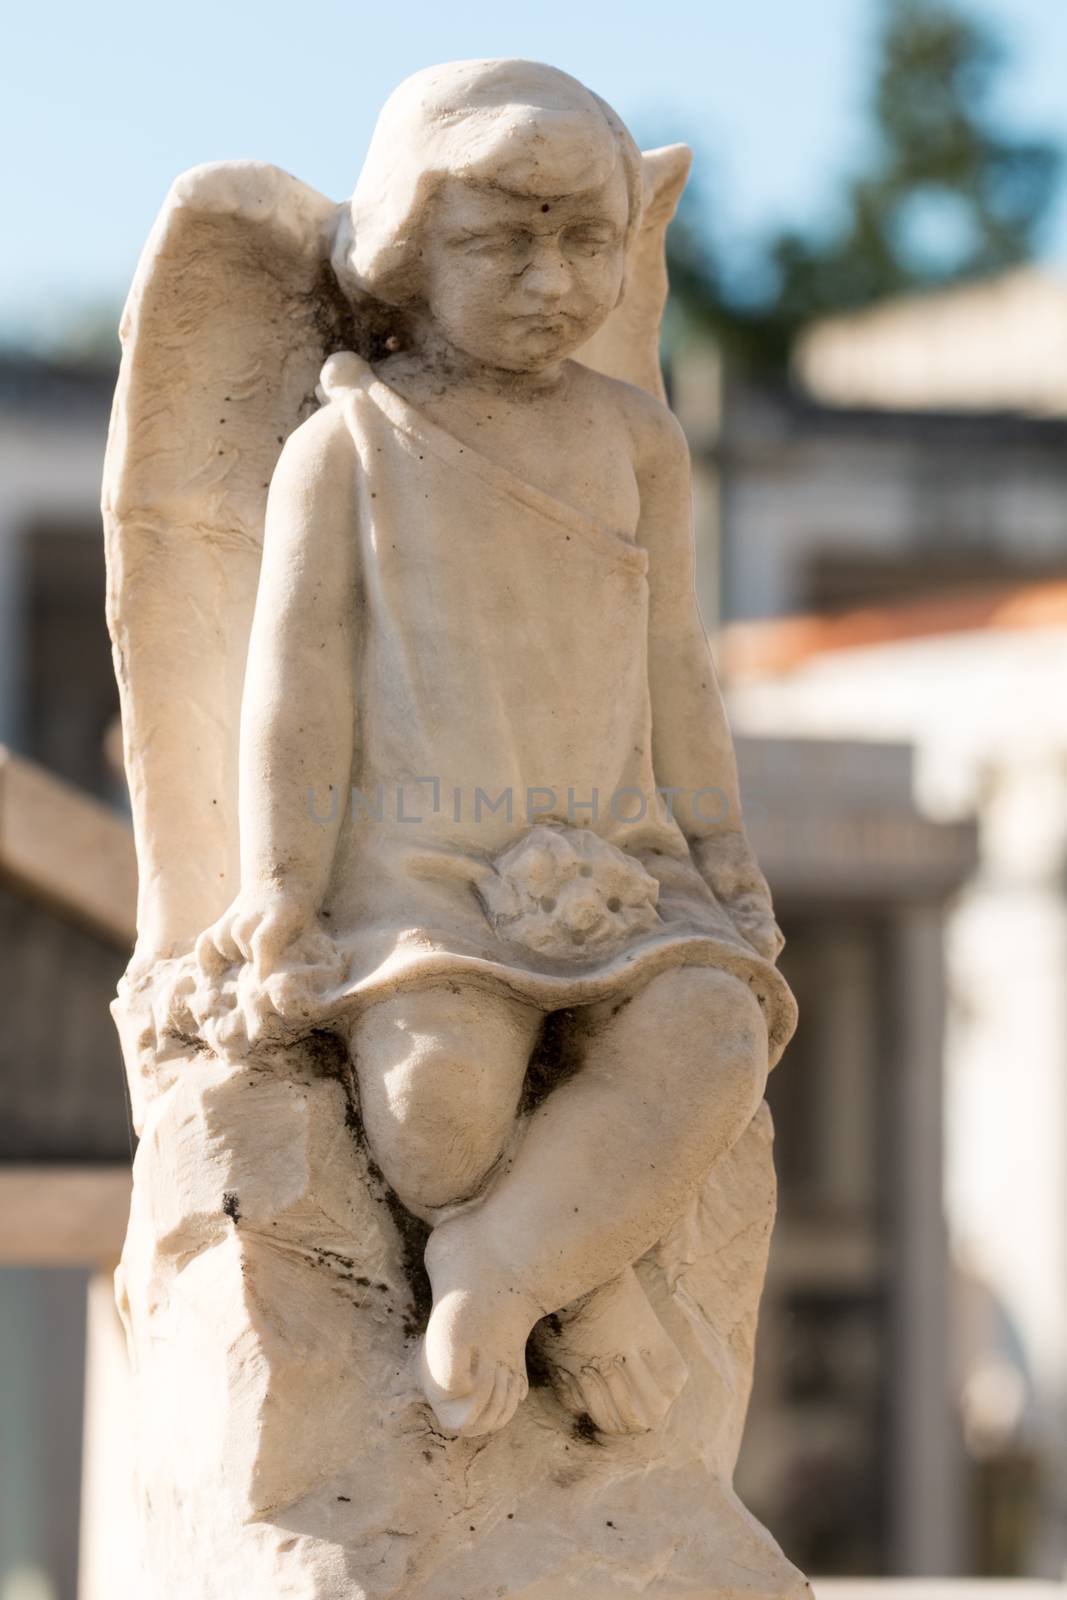 Ornamental details present on the graves of the cemeteries in Sicily